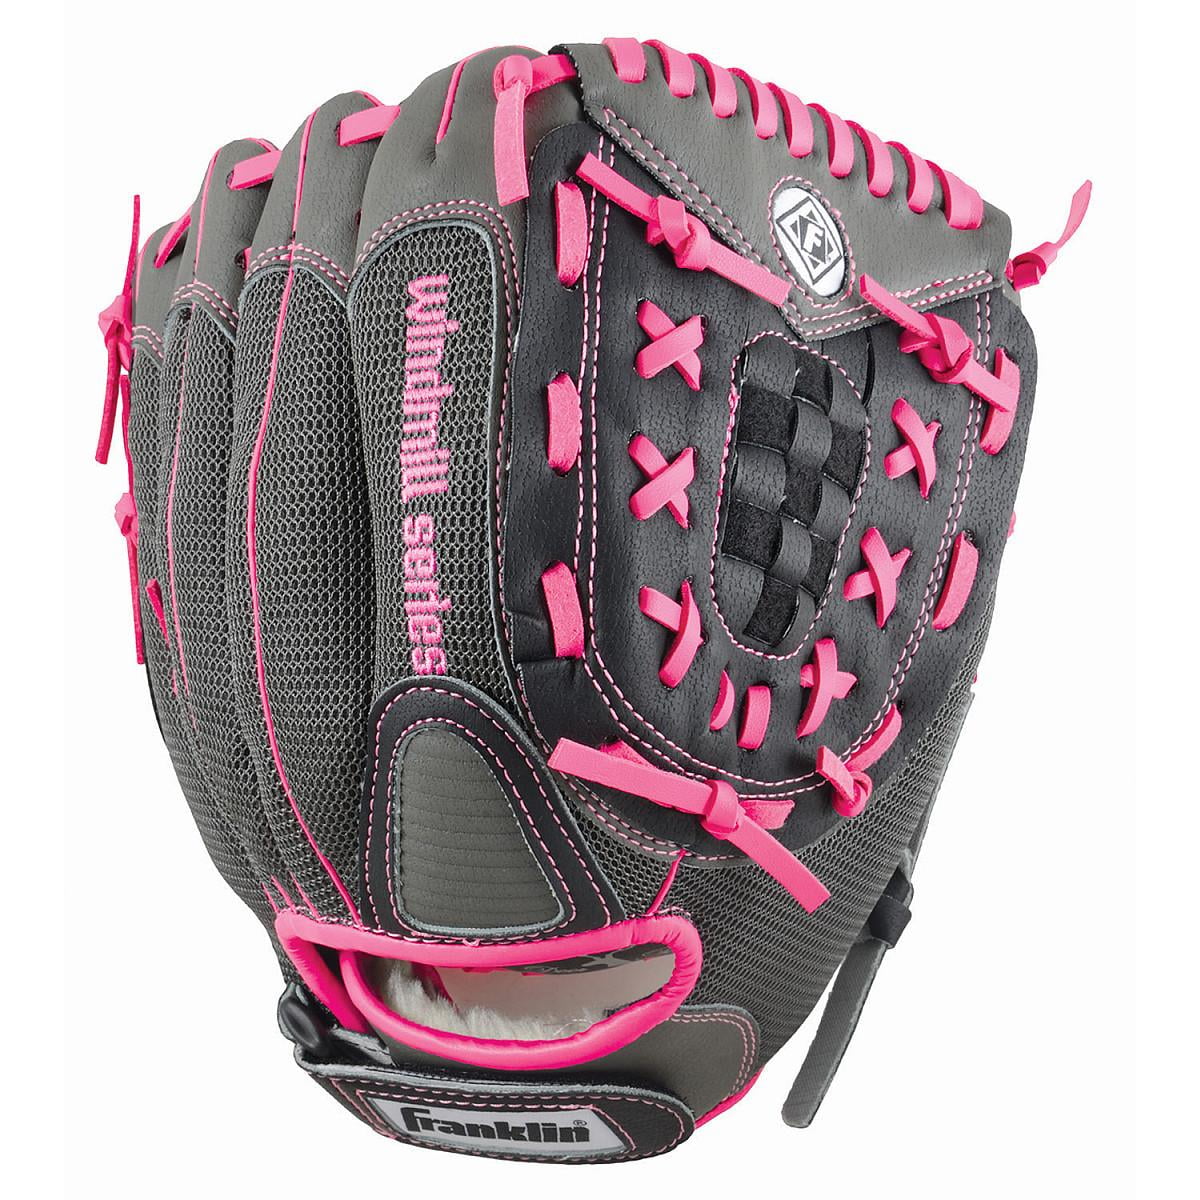 Rawlings Girls Fast Pitch Softball Glove Wfp115 11.5 Inch Black and Pink Hl1 for sale online 